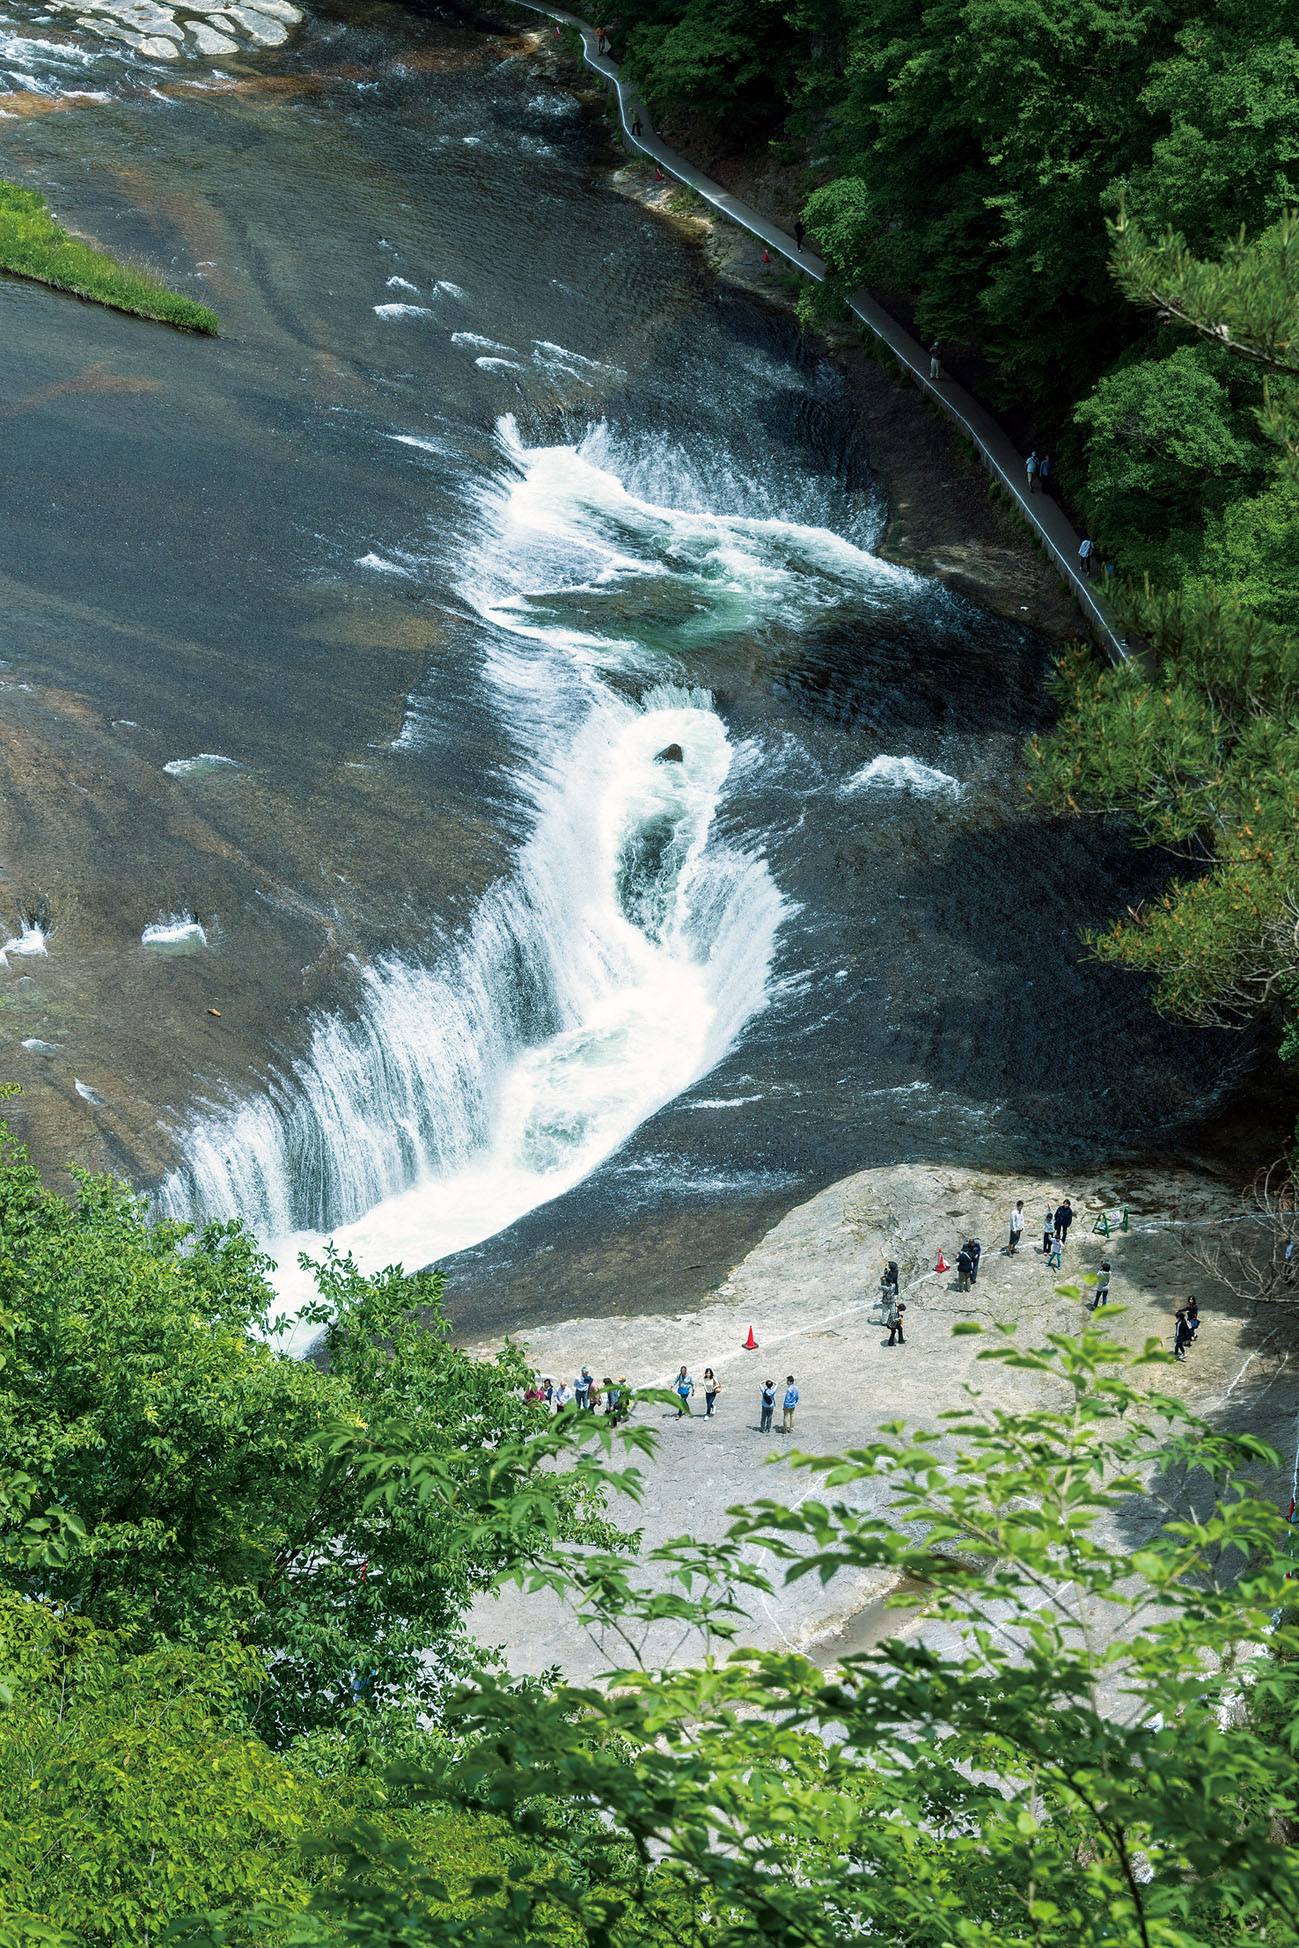 Fukiware Falls seen from the observation deck walkway. It is a formative art that has the power of nature inside.